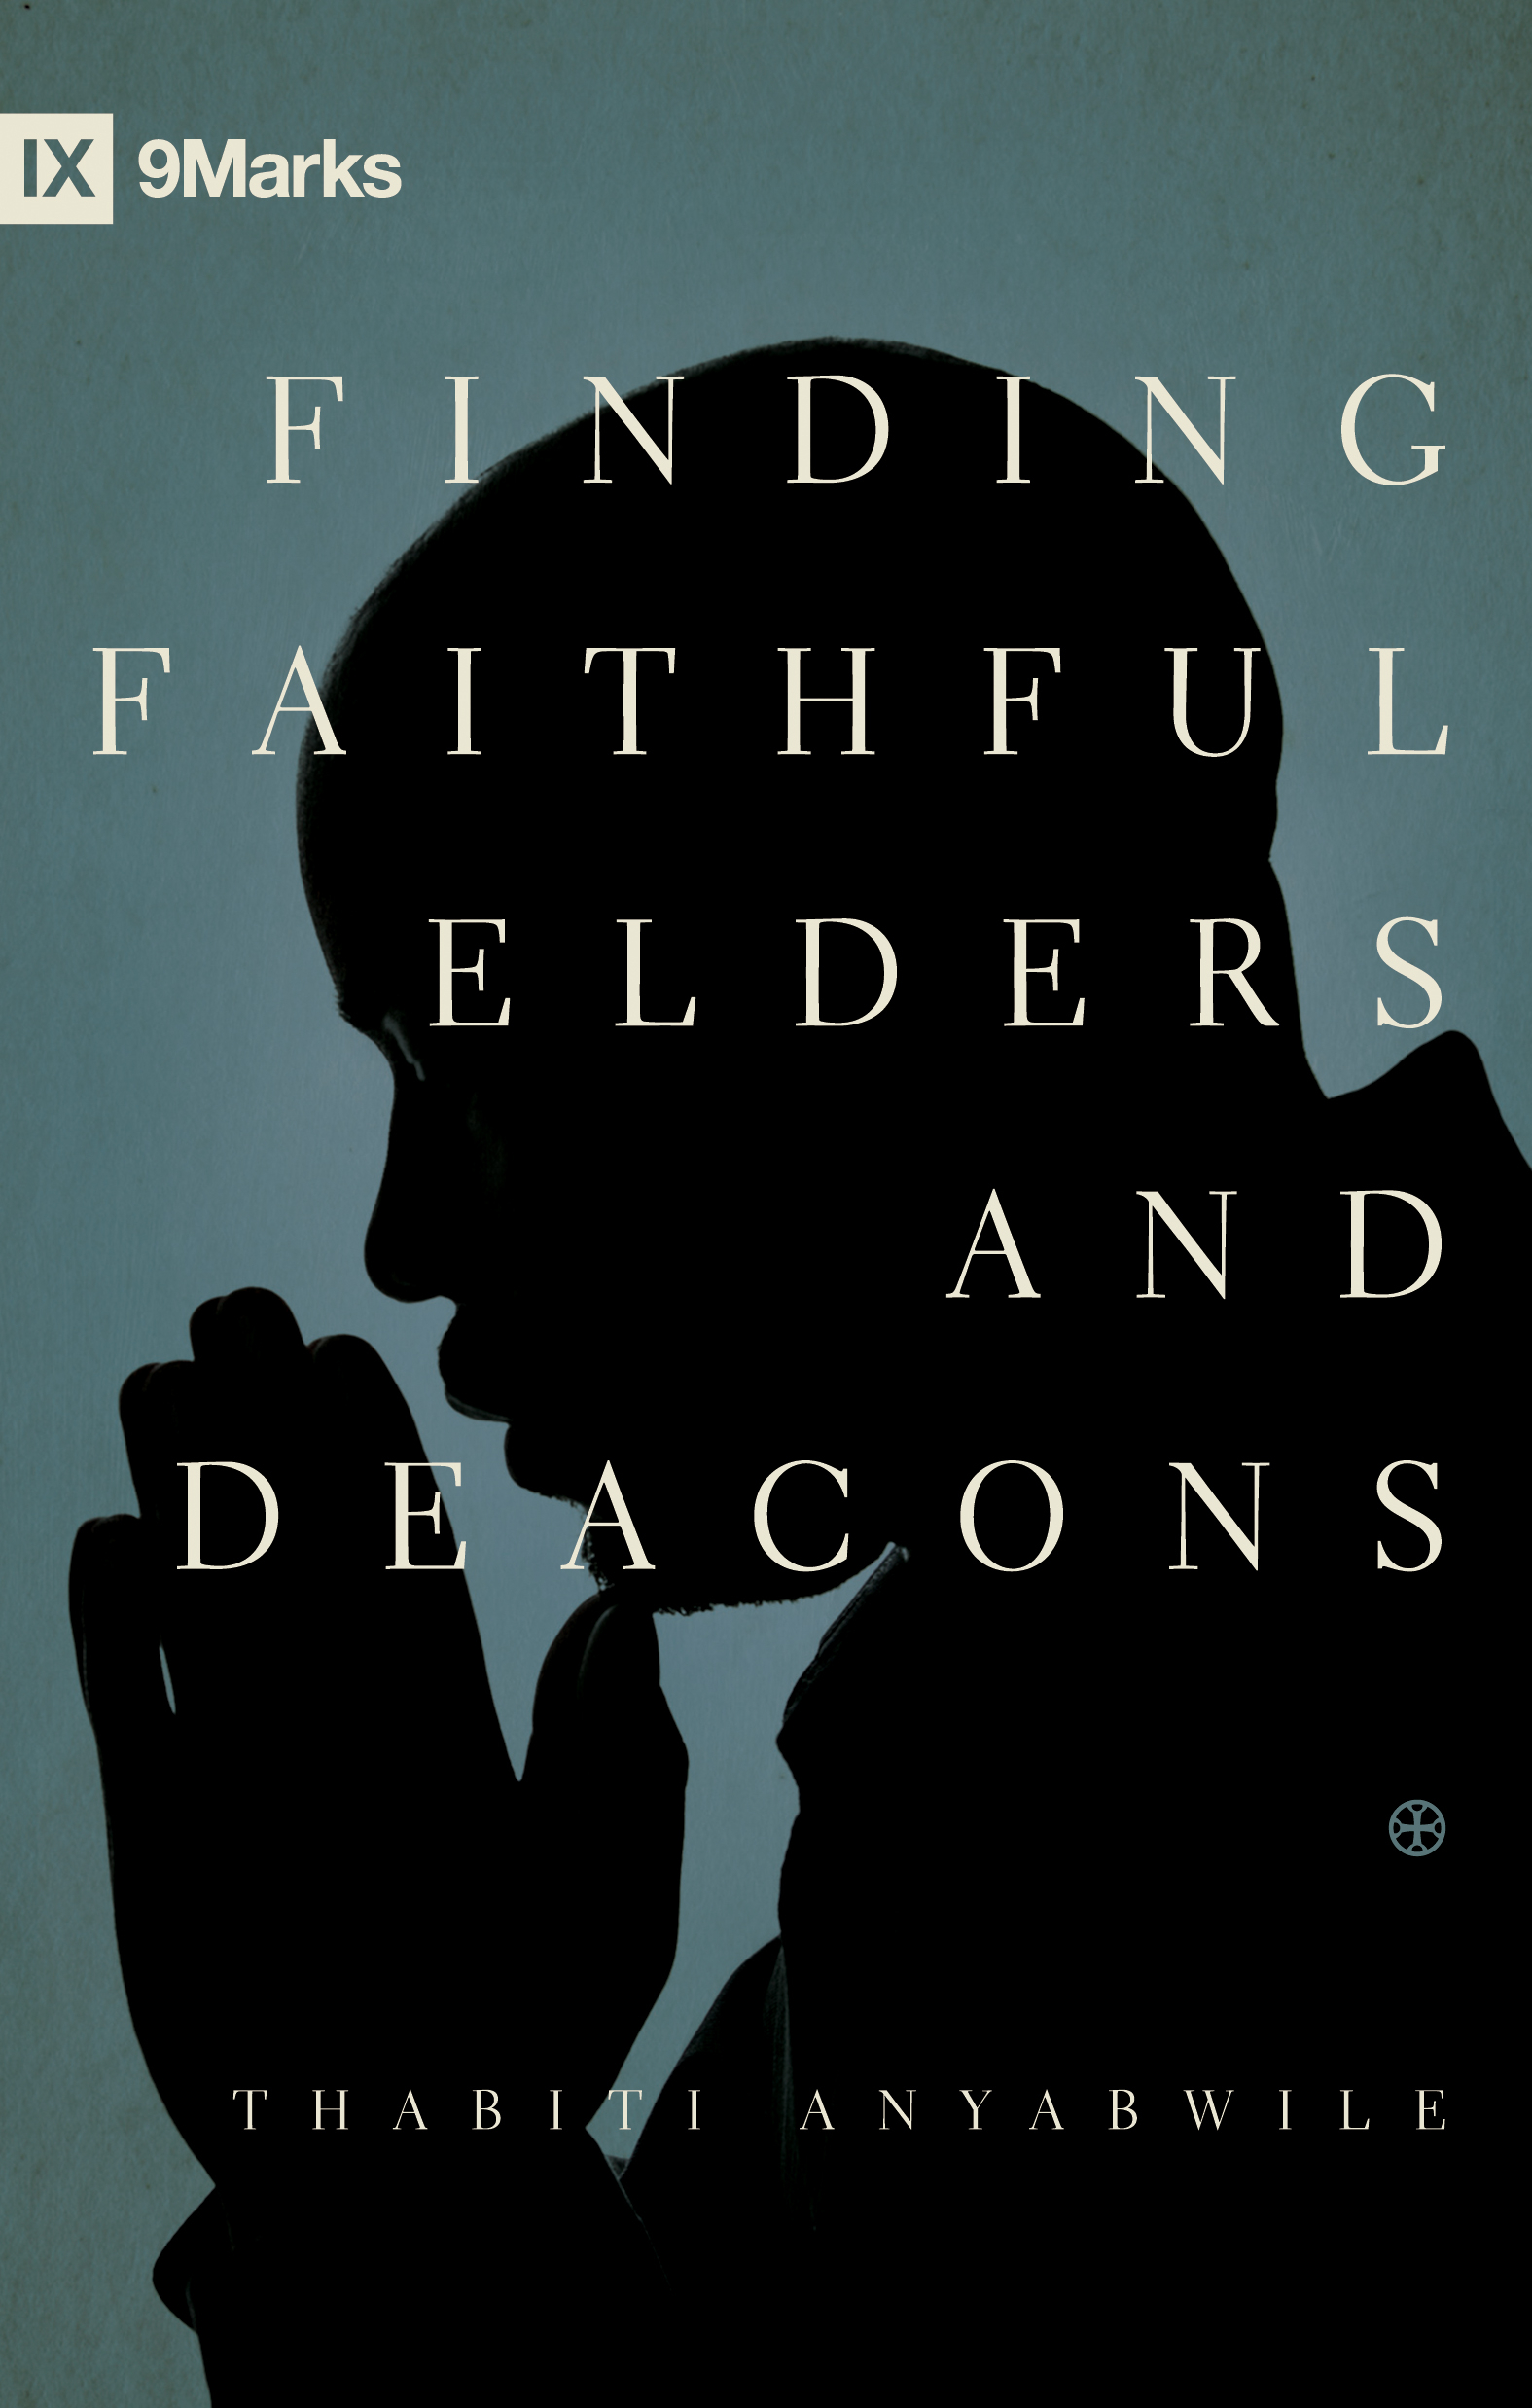 Finding Faithful Elders and Deacons by Thabiti M. Anyabwile at Eden